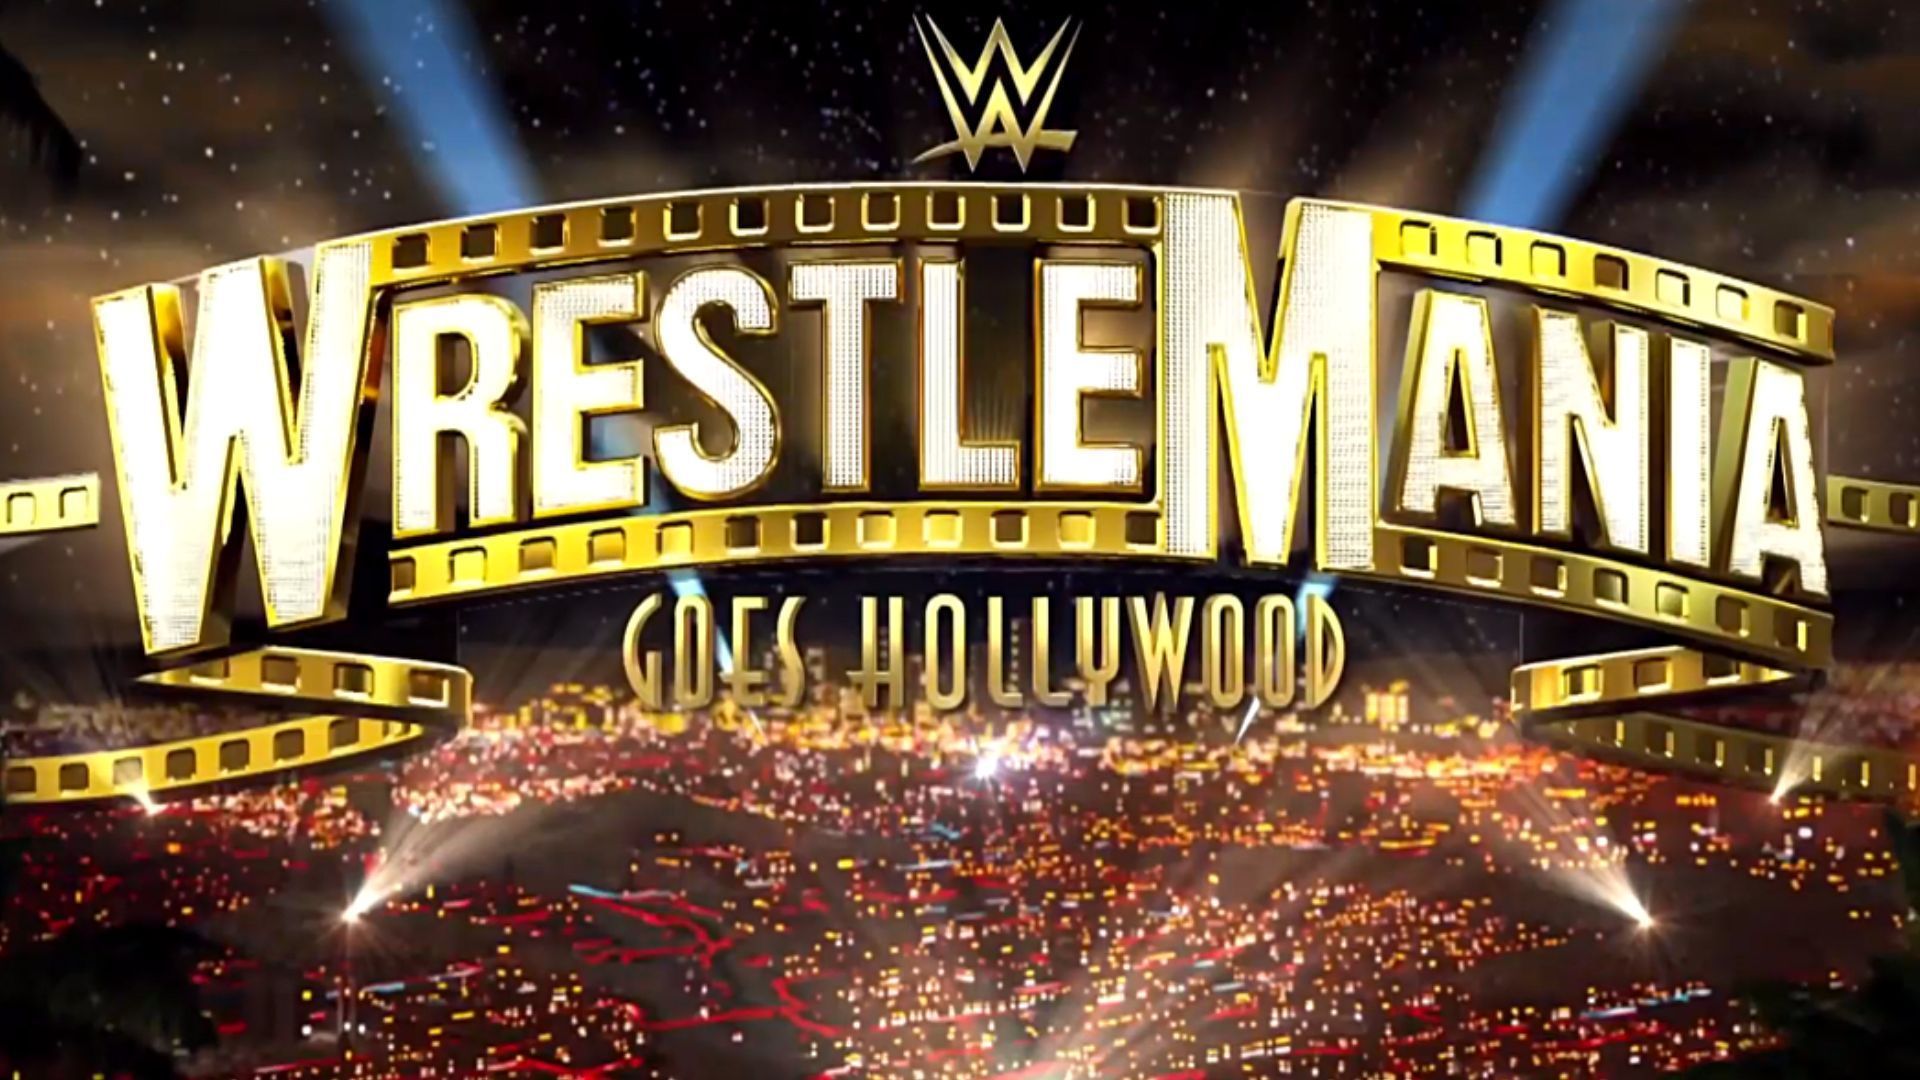 WrestleMania 39 features several WWE legends returning for a match